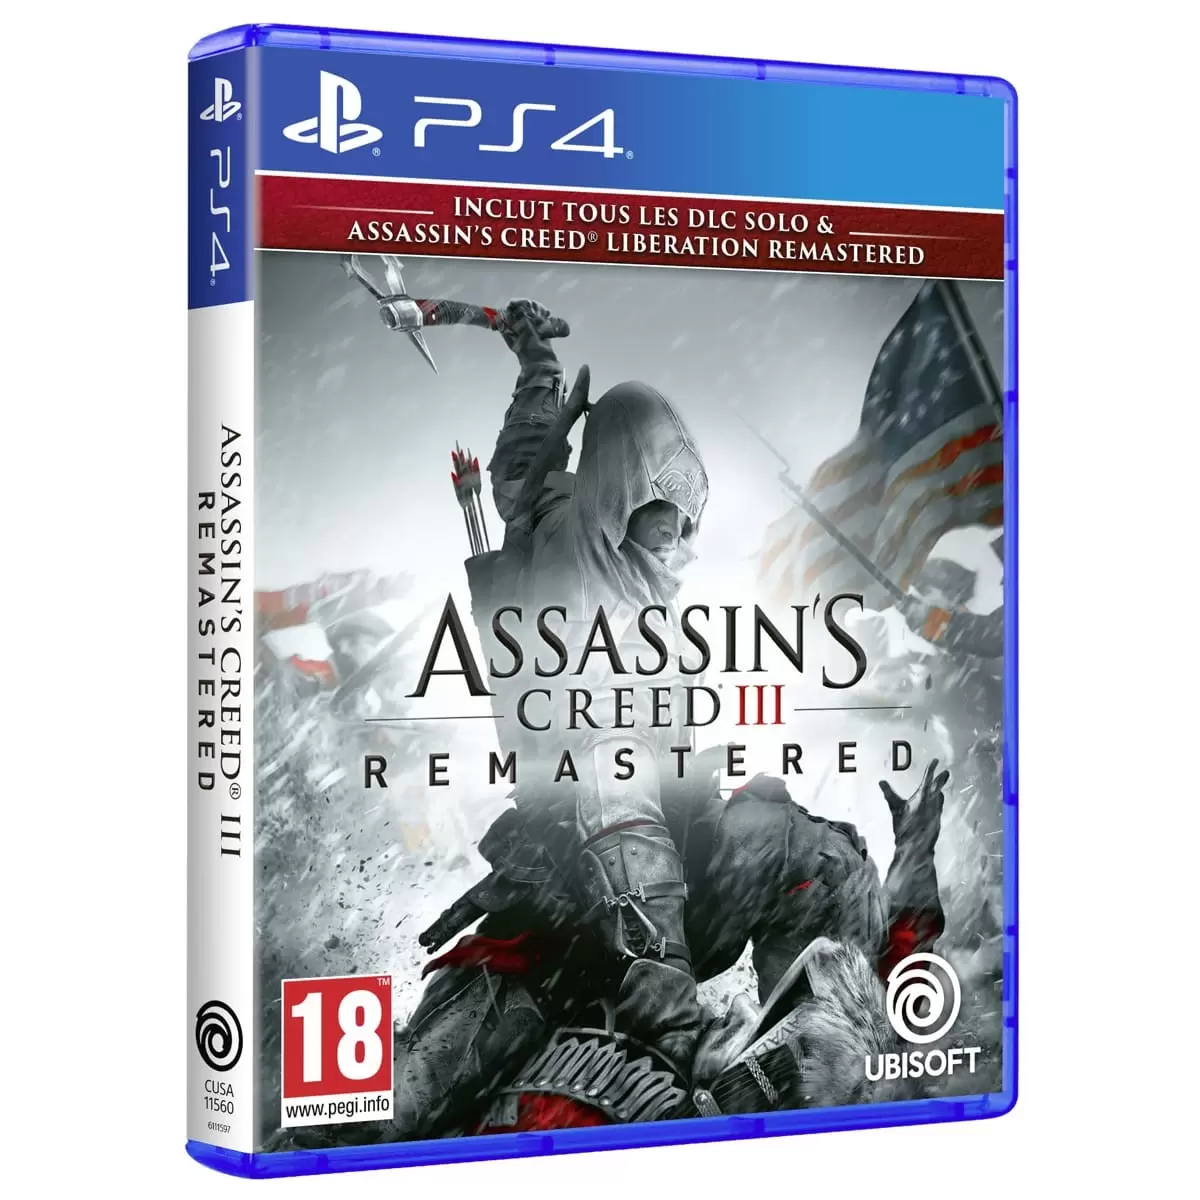 Assassin's Creed 3 + Assassin's Creed Libération Remastered - PS4 Games